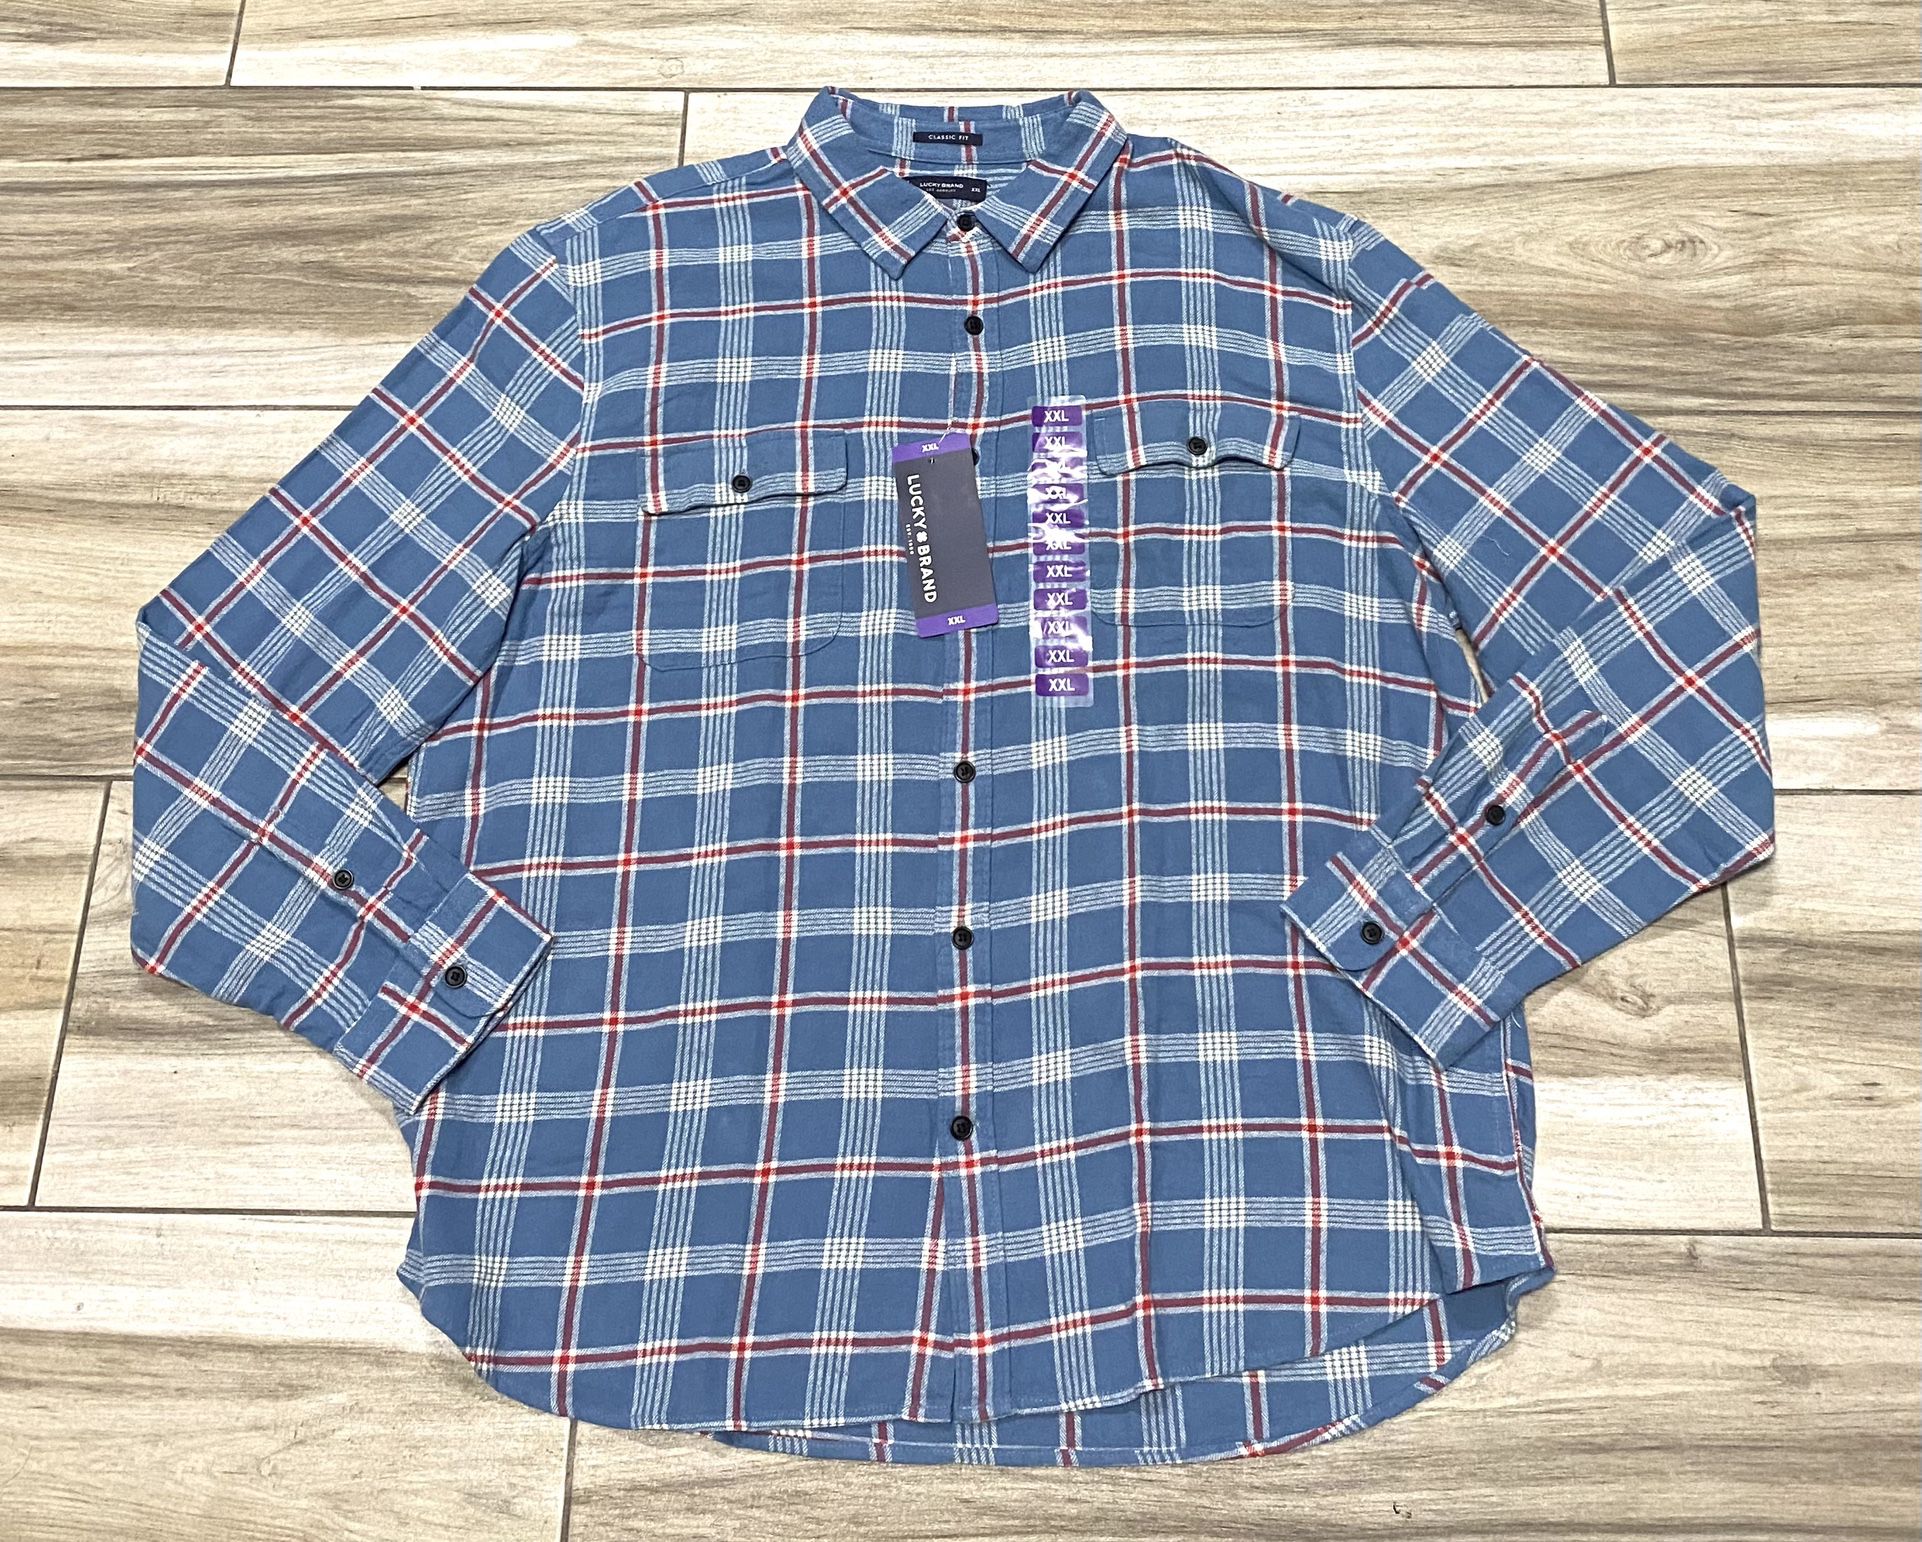 Lucky Brand Woven Casual Button Down Blue Plaid Shirt Classic Fit Mens 2XL New